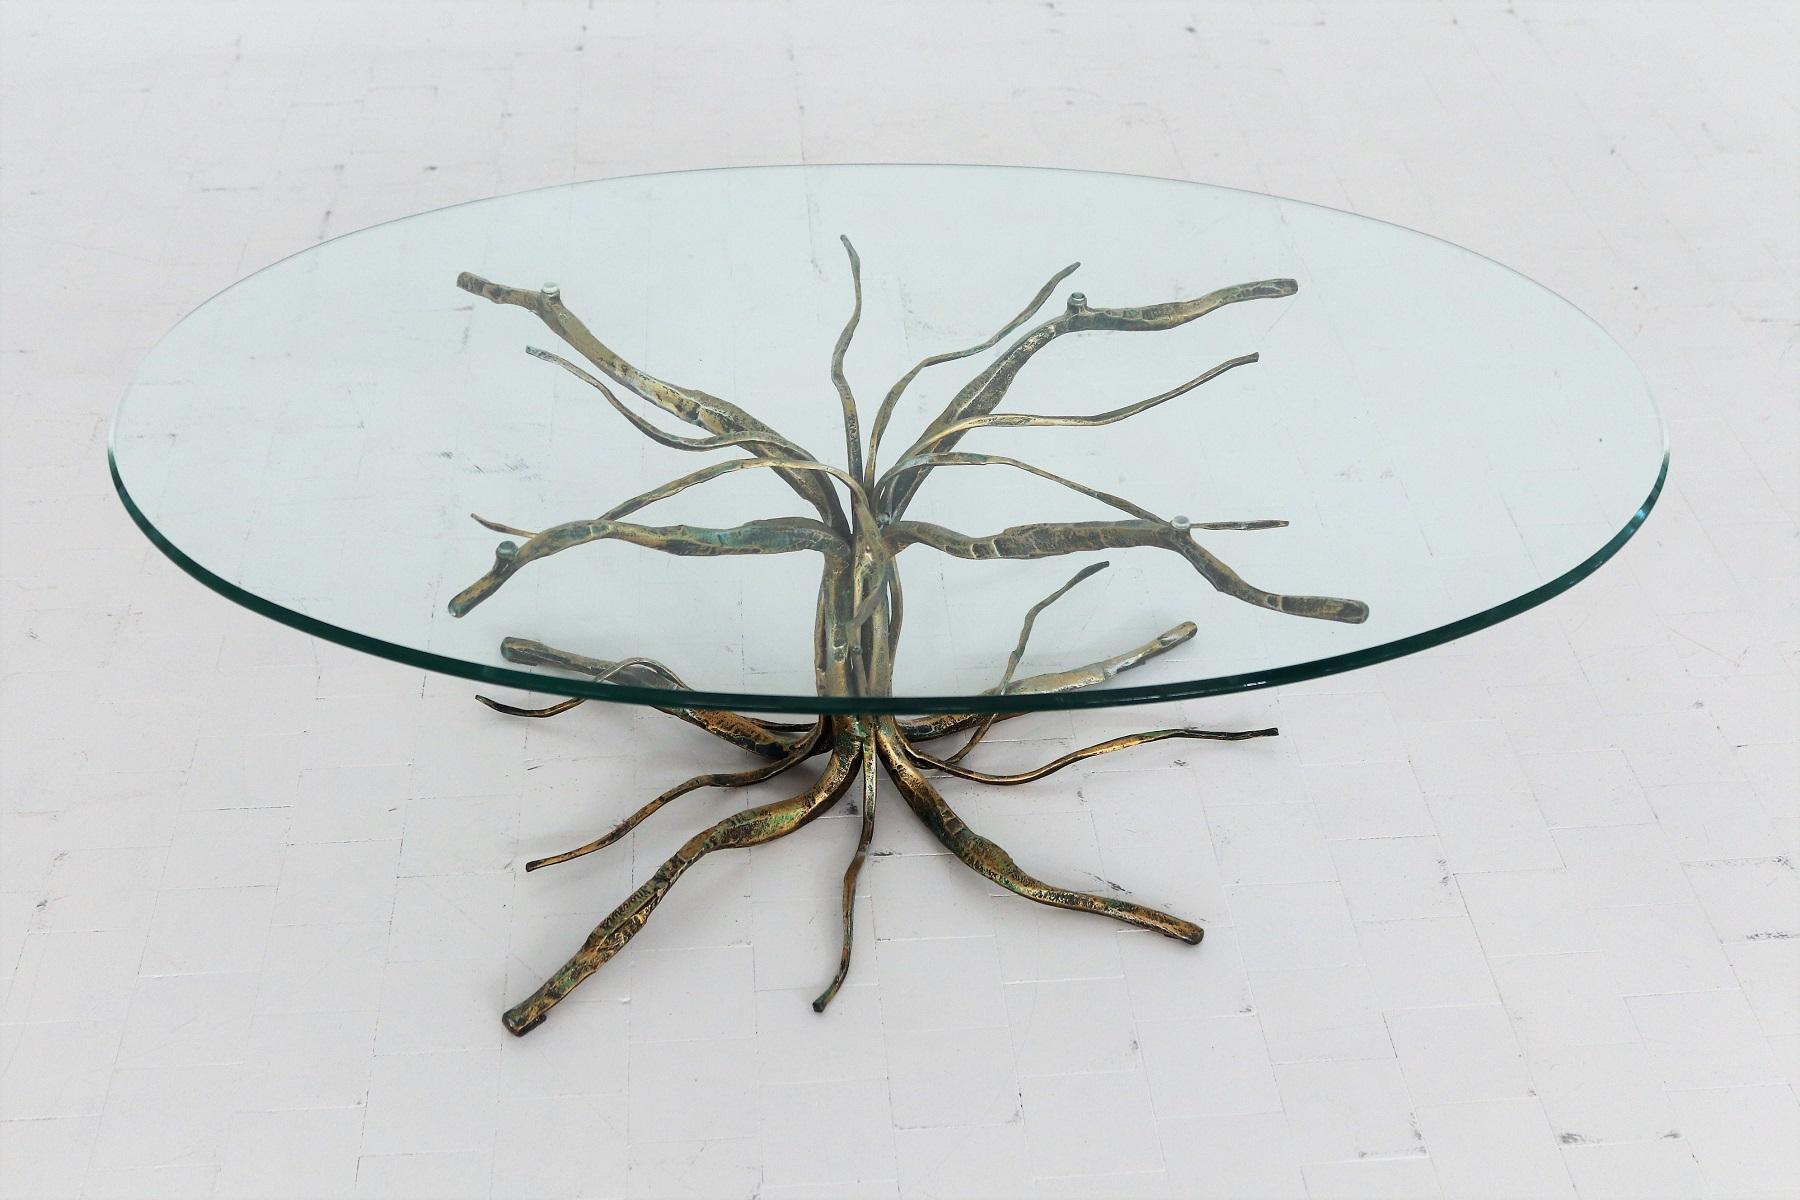 Italian Brutalist Coffee Table in Tree Shape by Salvino Marsura 1960s For Sale 13